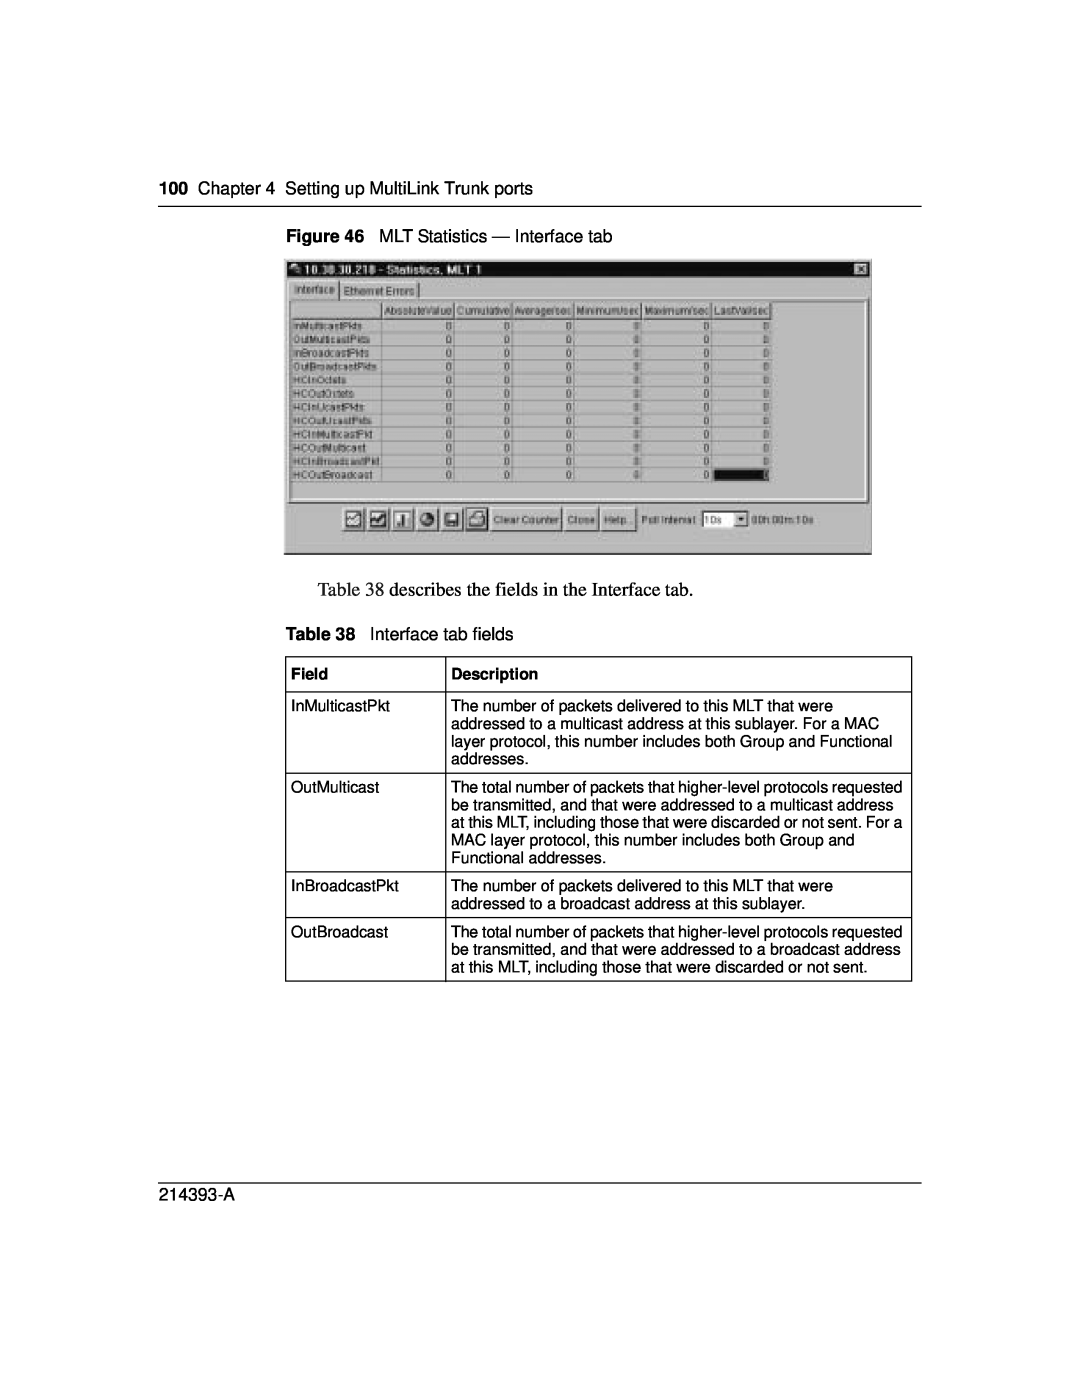 Nortel Networks 214393-A 100Chapter 4 Setting up MultiLink Trunk ports, MLT Statistics - Interface tab, Field, Description 